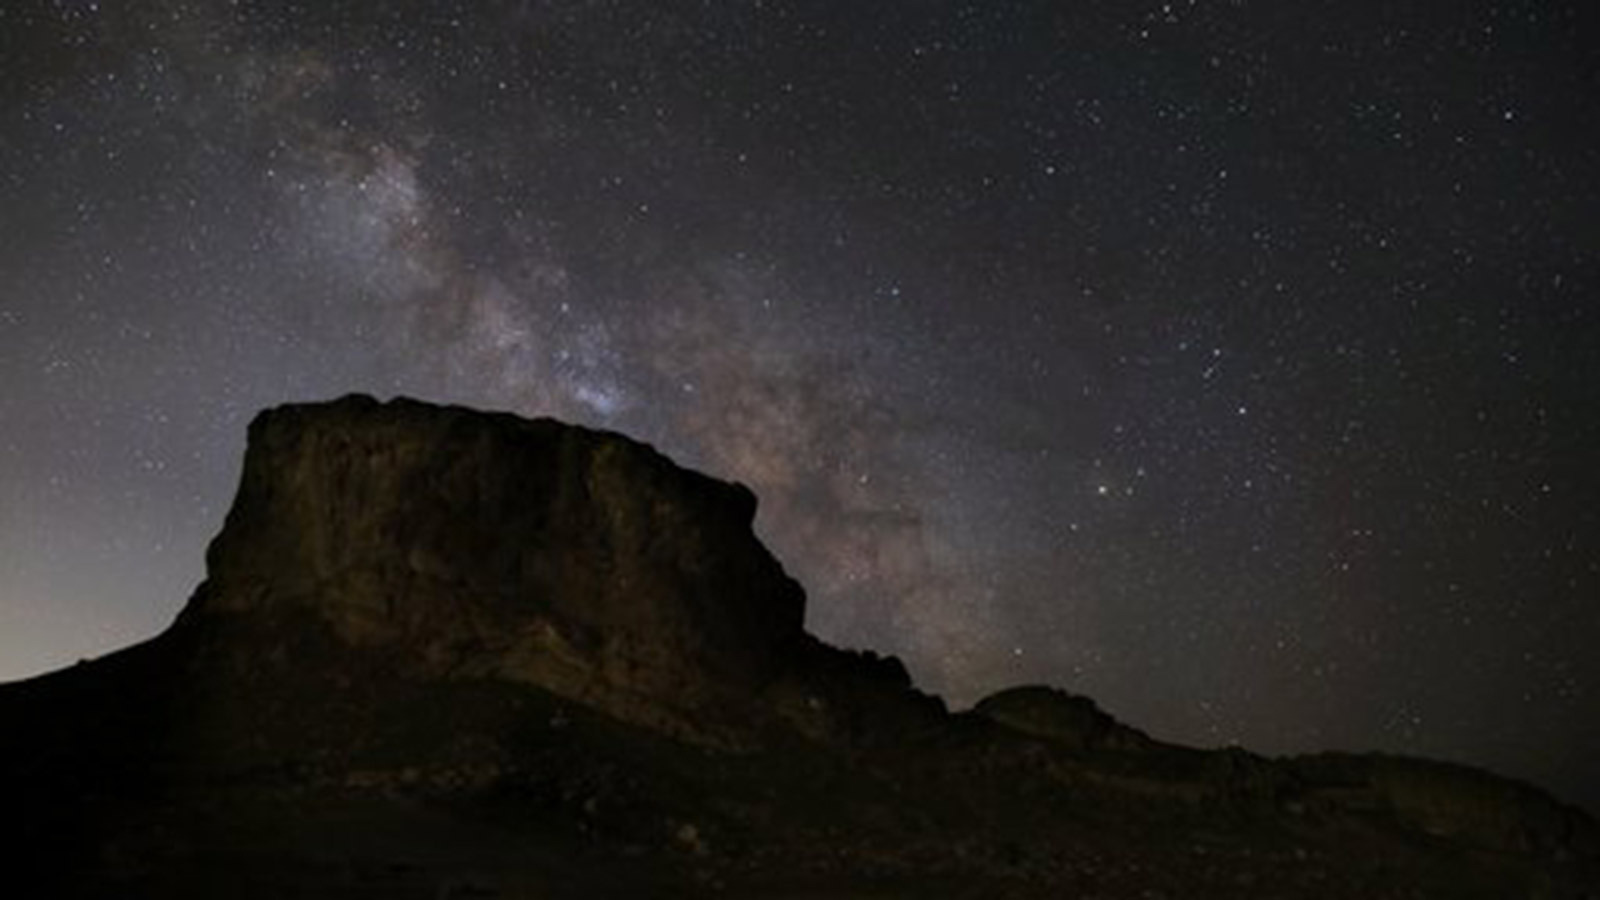 A picture of the night sky in Skull Valley Utah from June 2021 shows the constellation Scorpius to the upper right of the silhouette of a desert butte. The dark blue sky is filled with countless bright stars. Credit: NASA/Bill Dunford